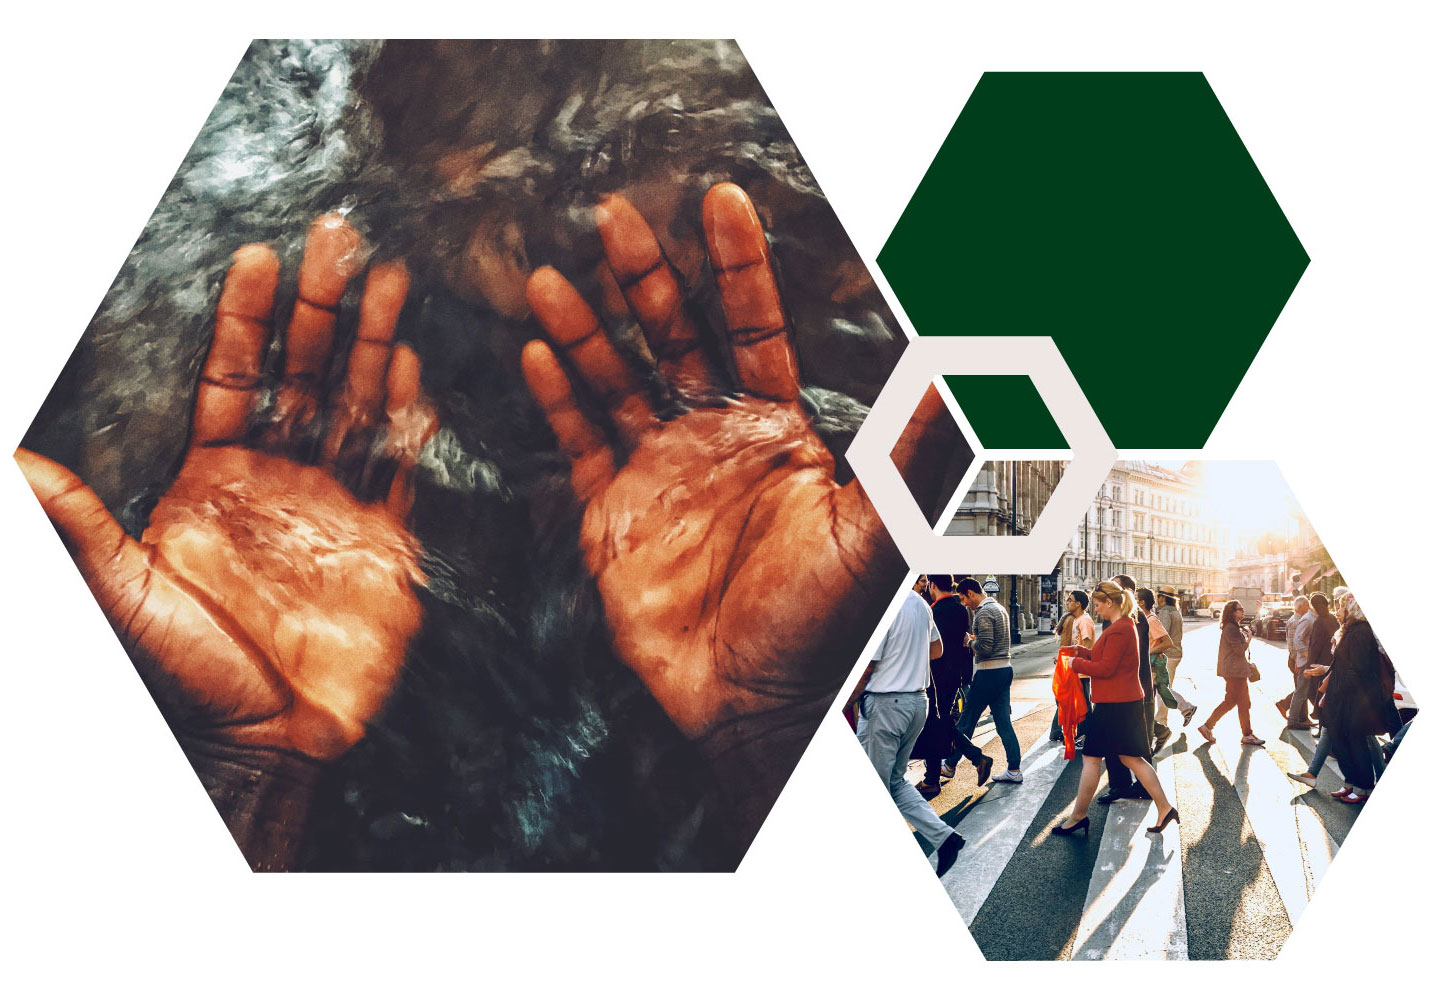 Hexagon collage with an image of hands and an image of people crossing the street.